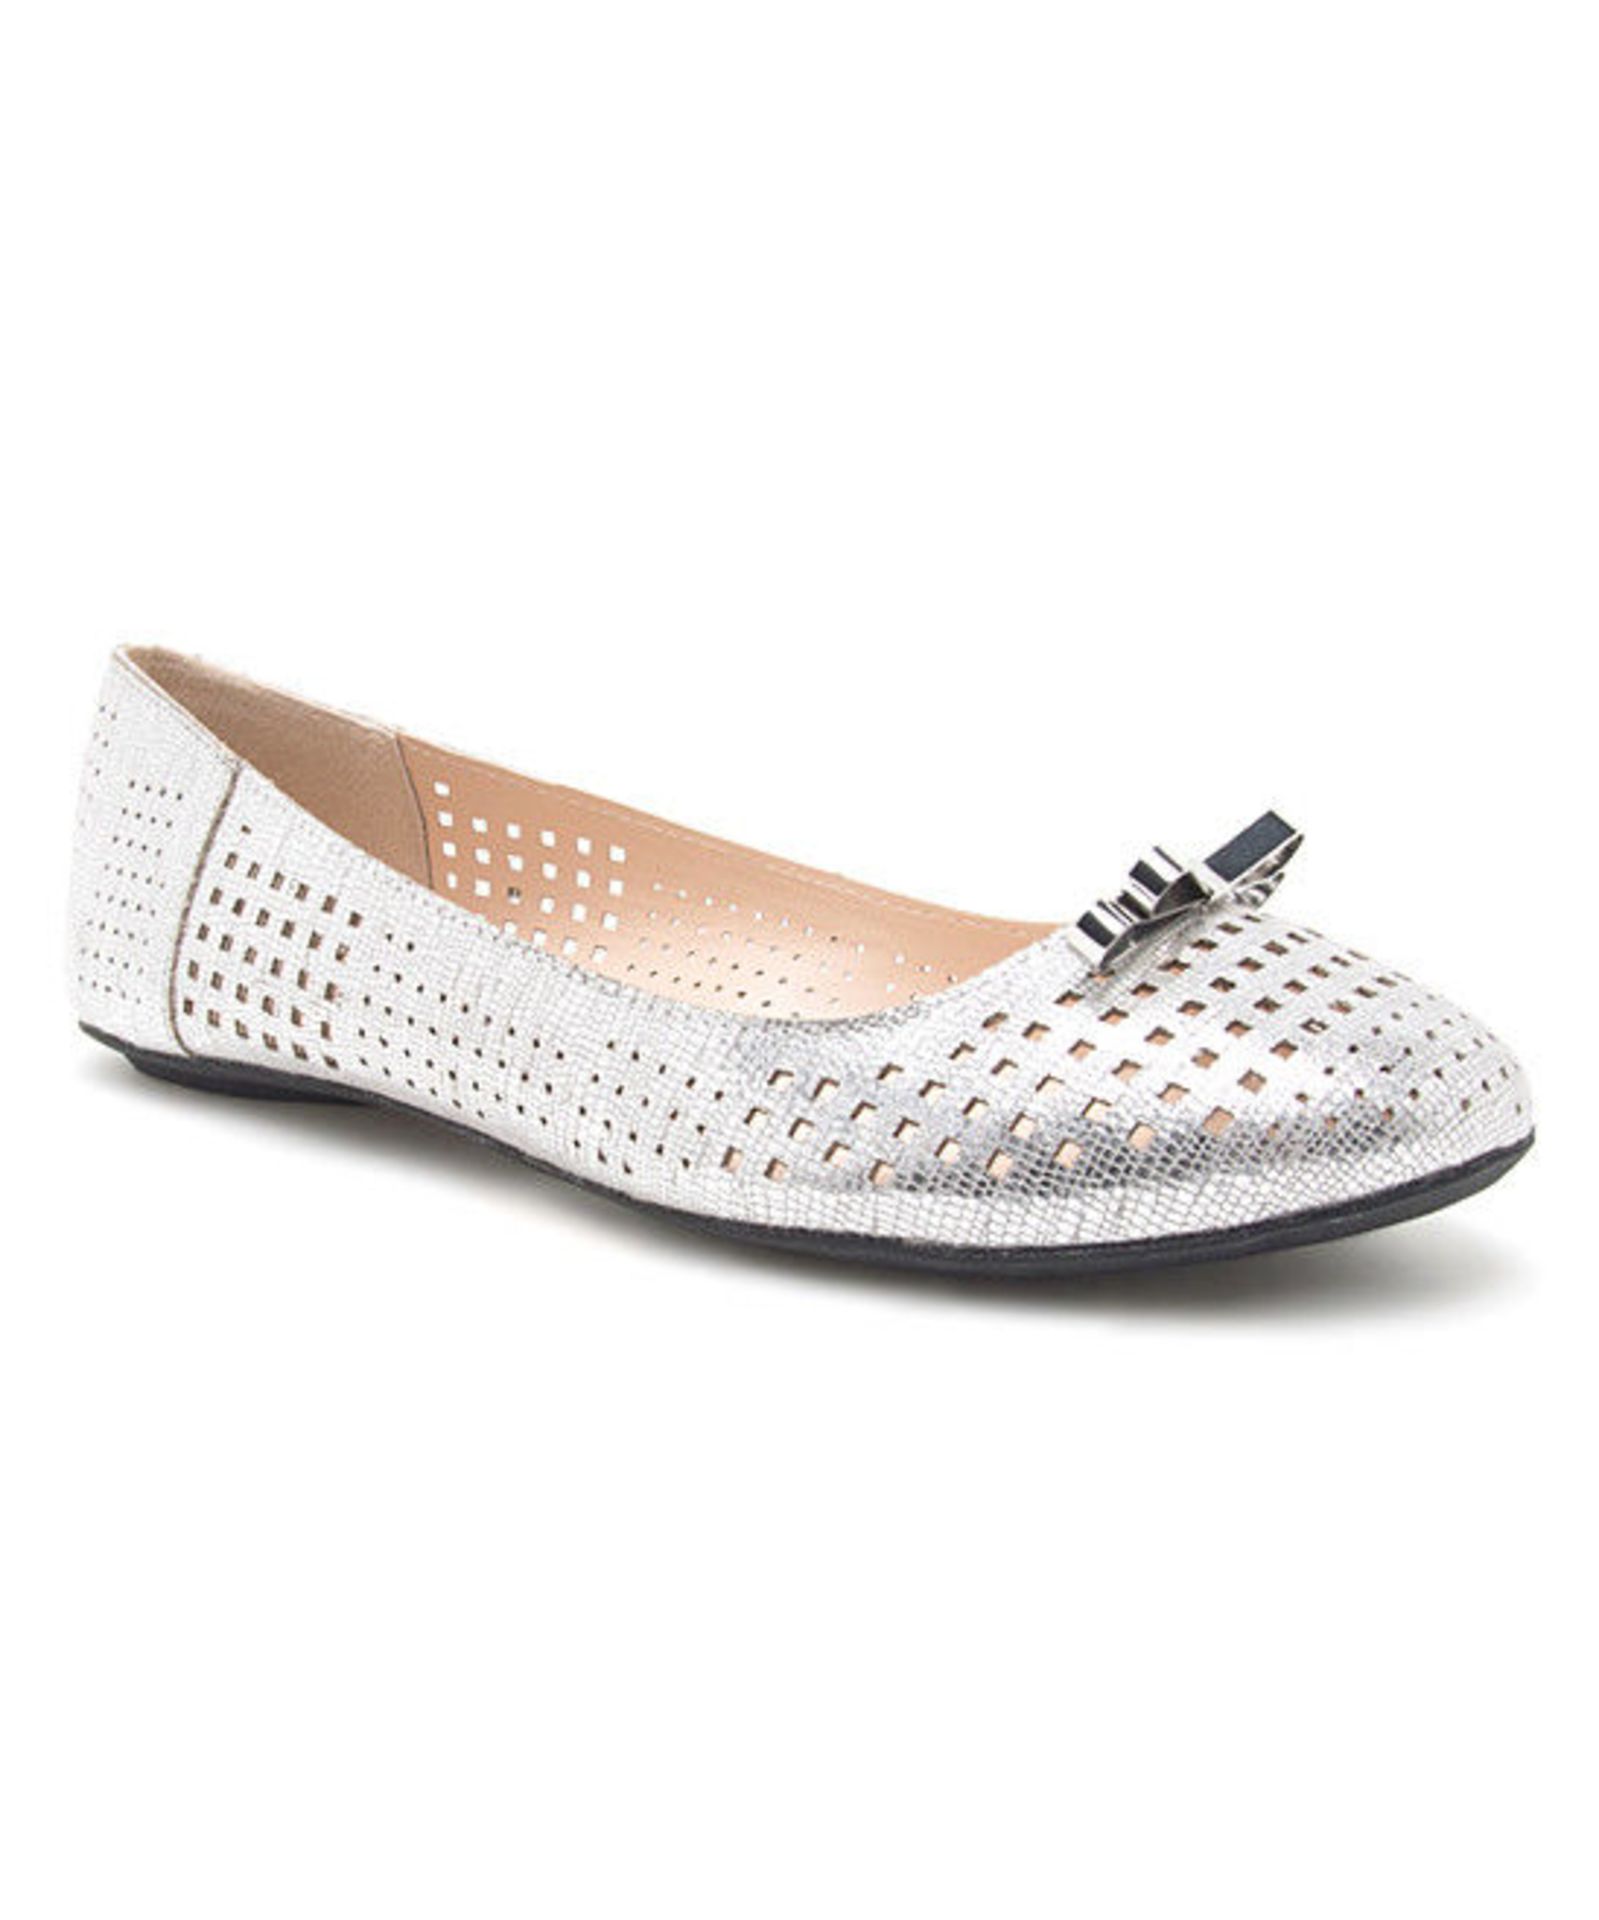 Qupid Silver Perforated Ballet Flats (UK Size: 5/US Size: 7) (New with box) [Ref: 42105582- D-002]